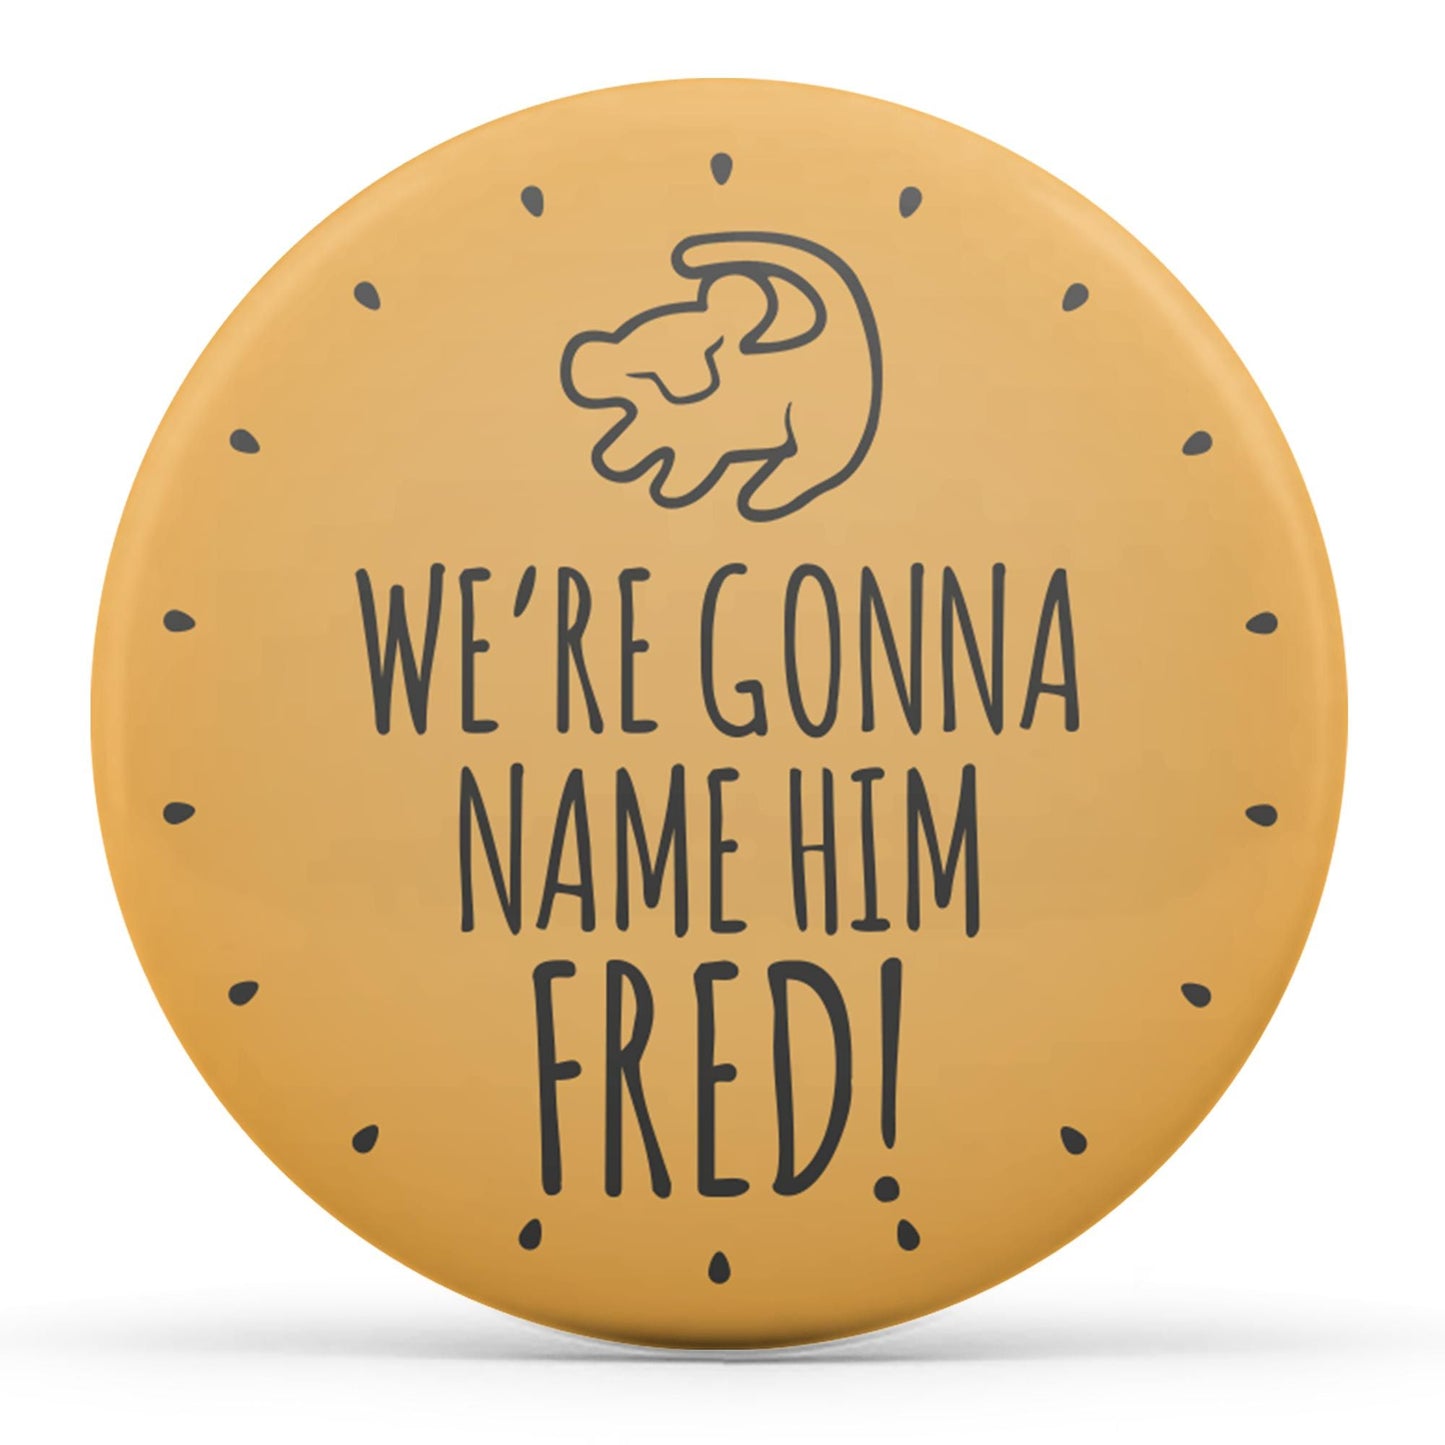 We're Gonna Name Him Fred Image